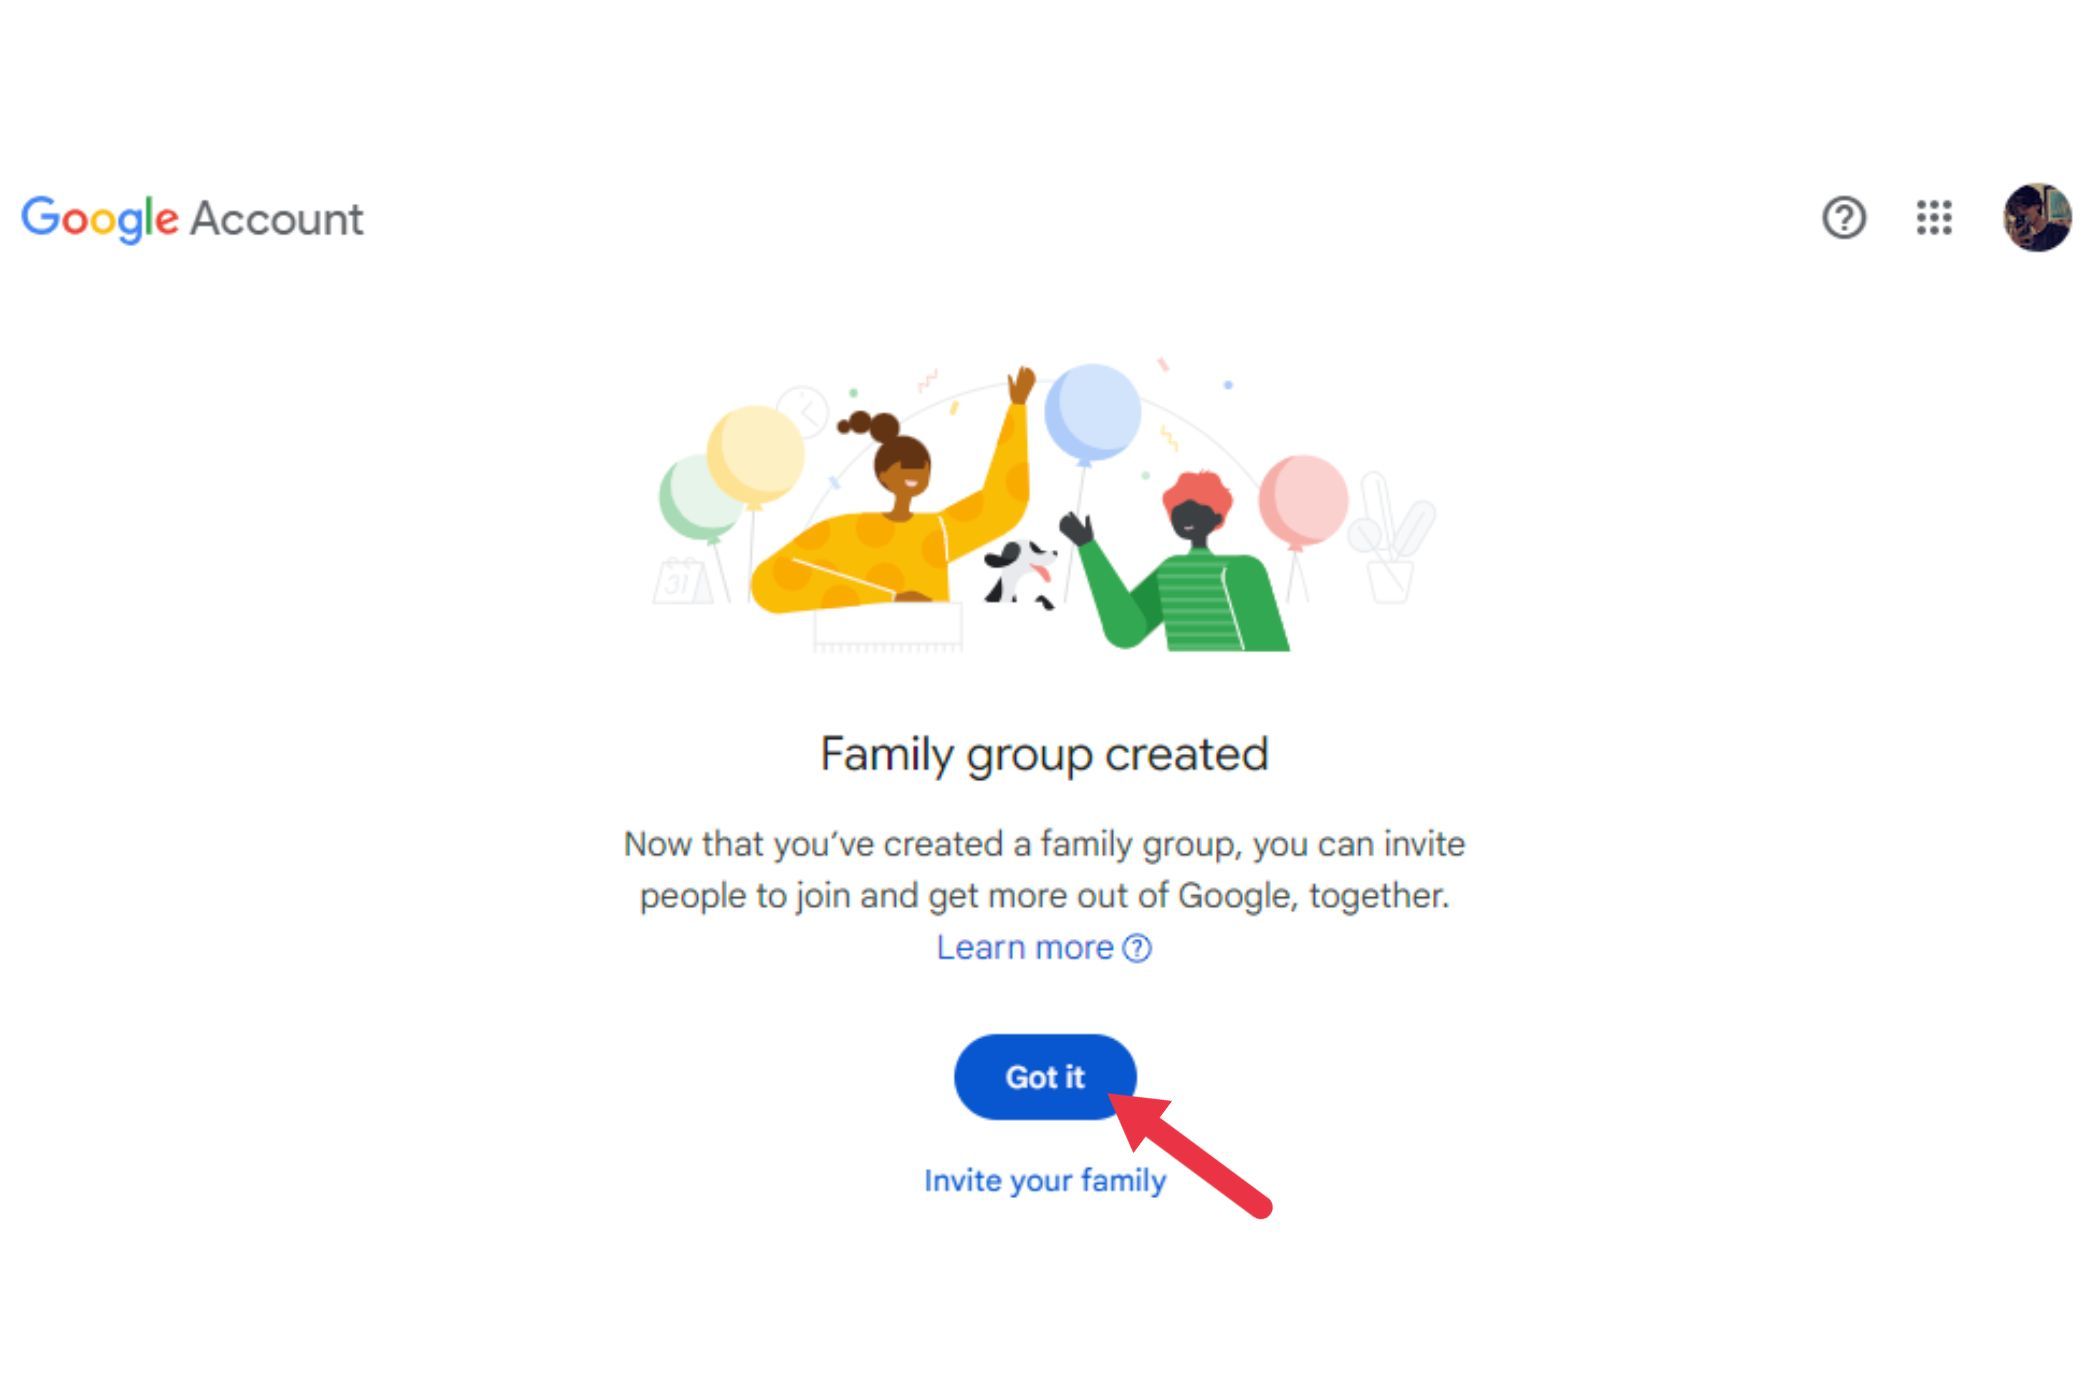 Your family group is created.